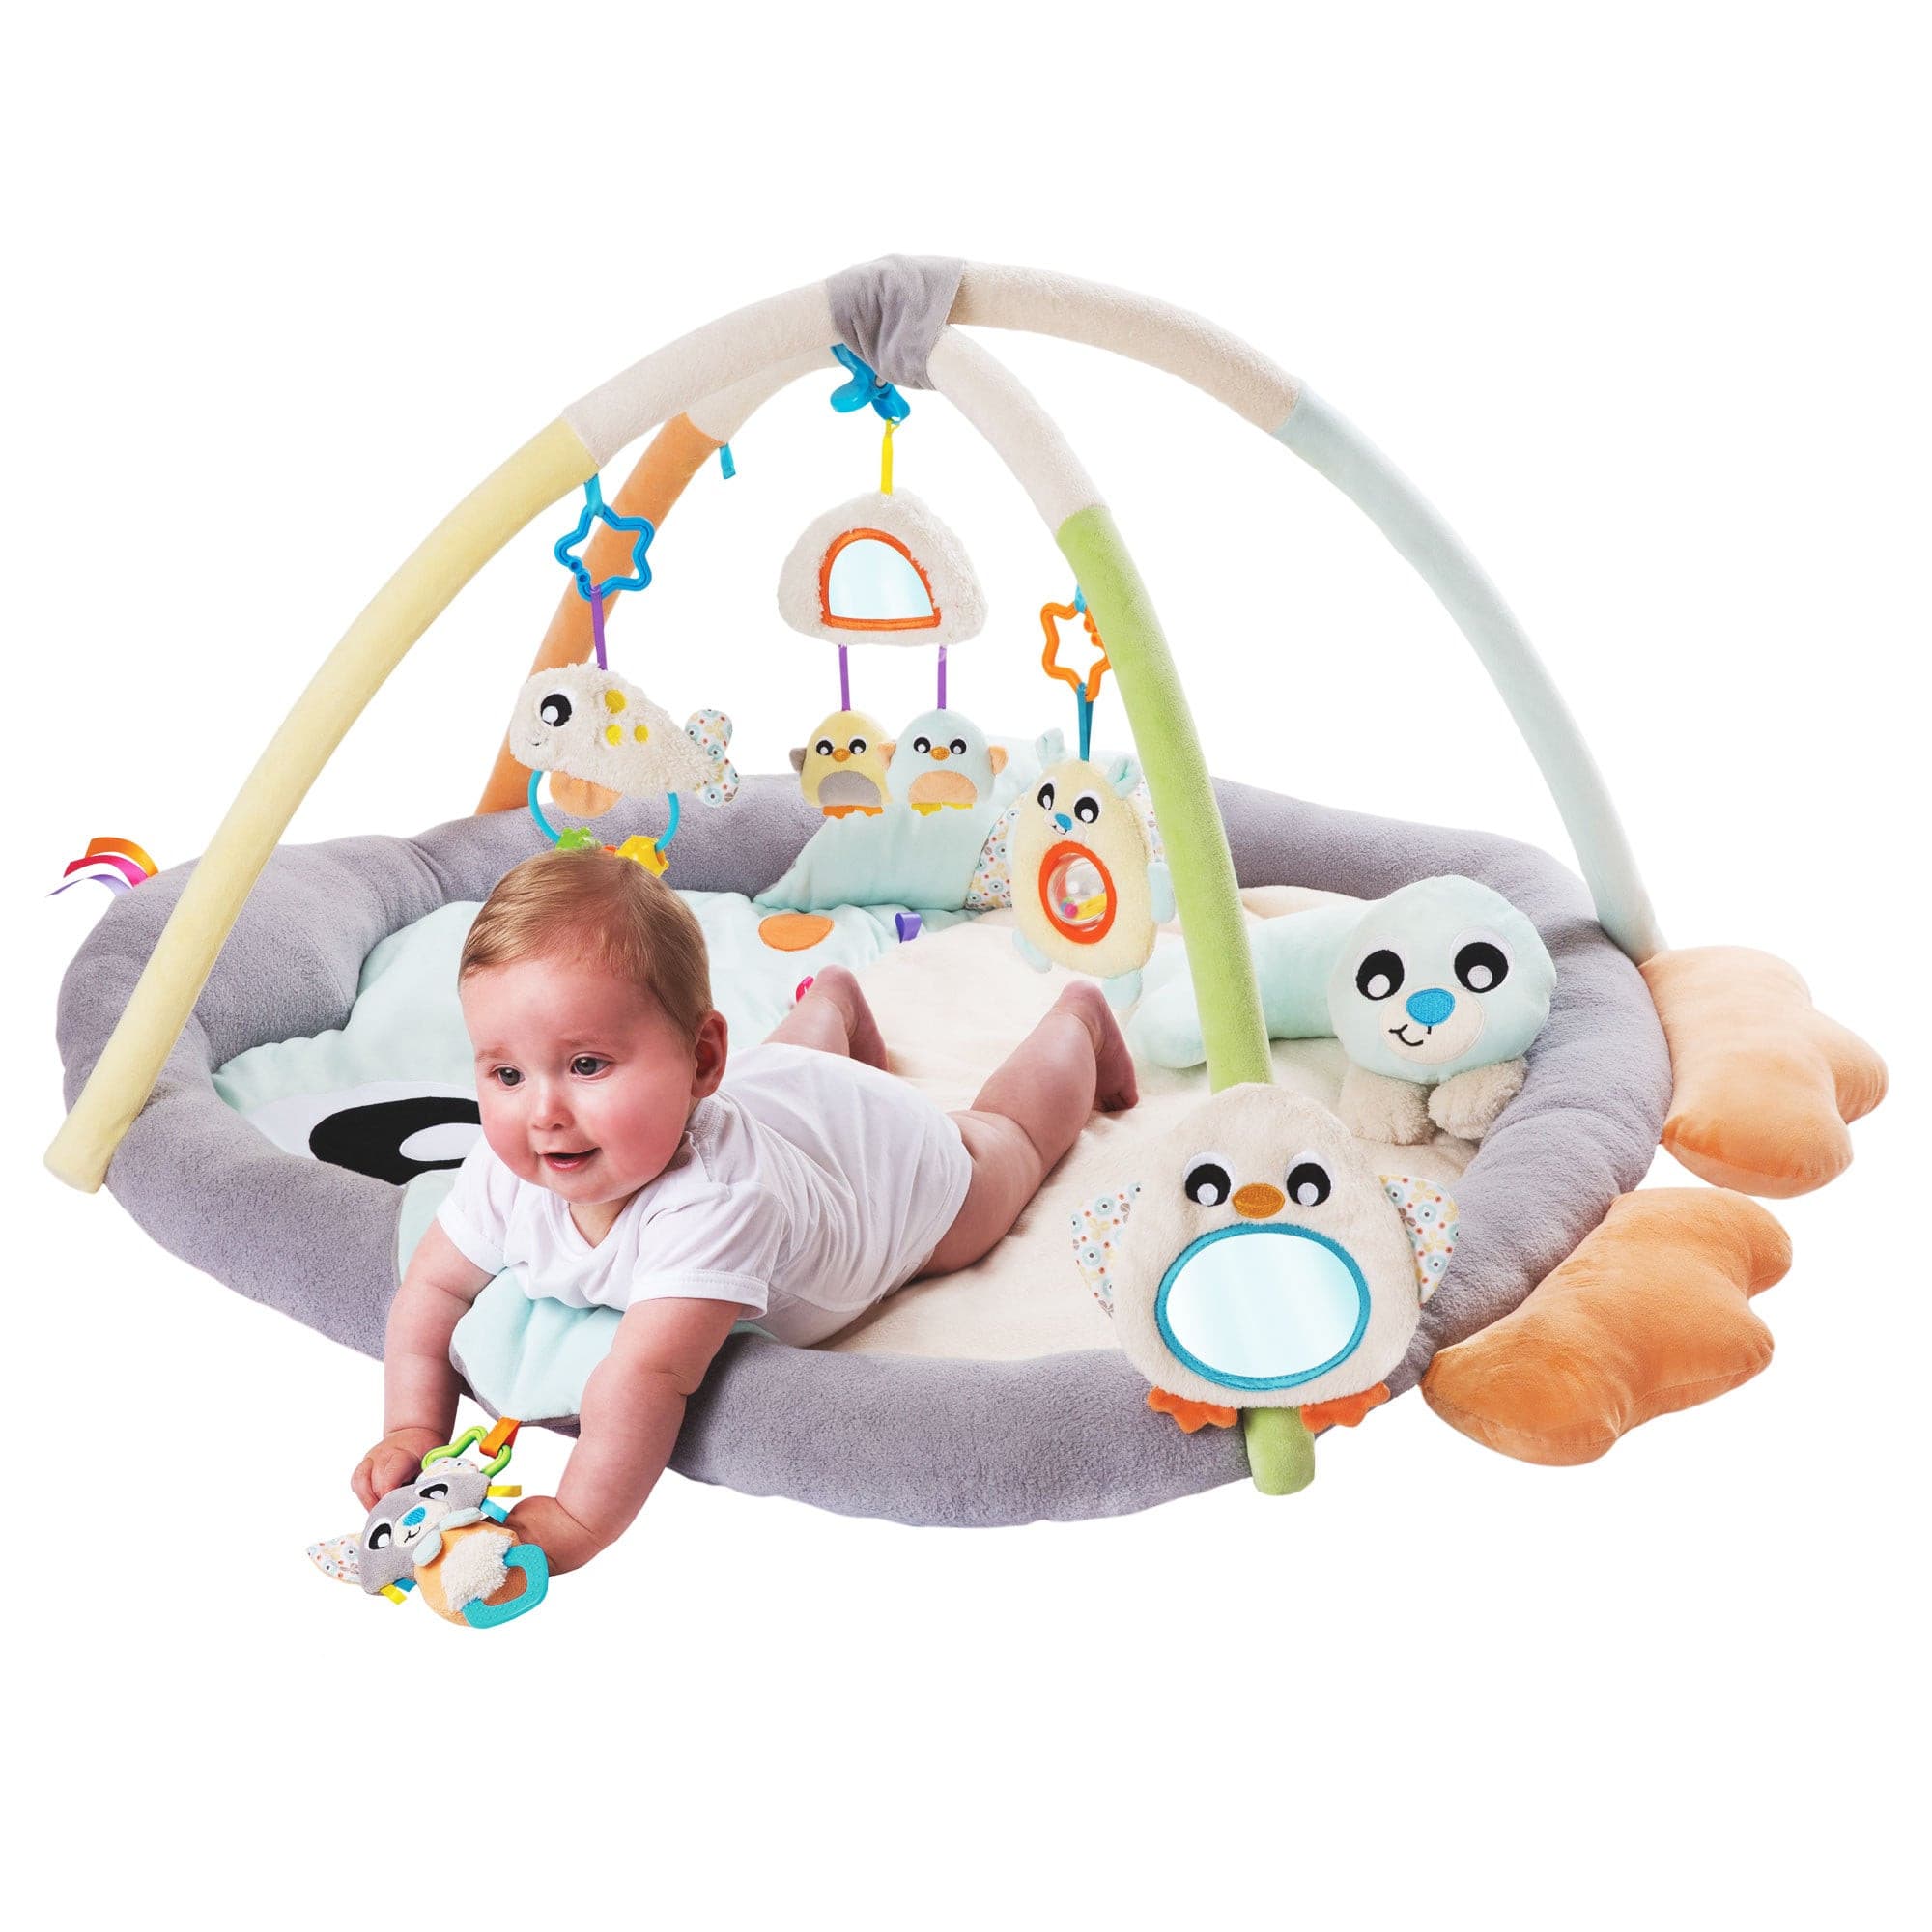 Snuggle Me Penguin Tummy Time Gym by Playgro.